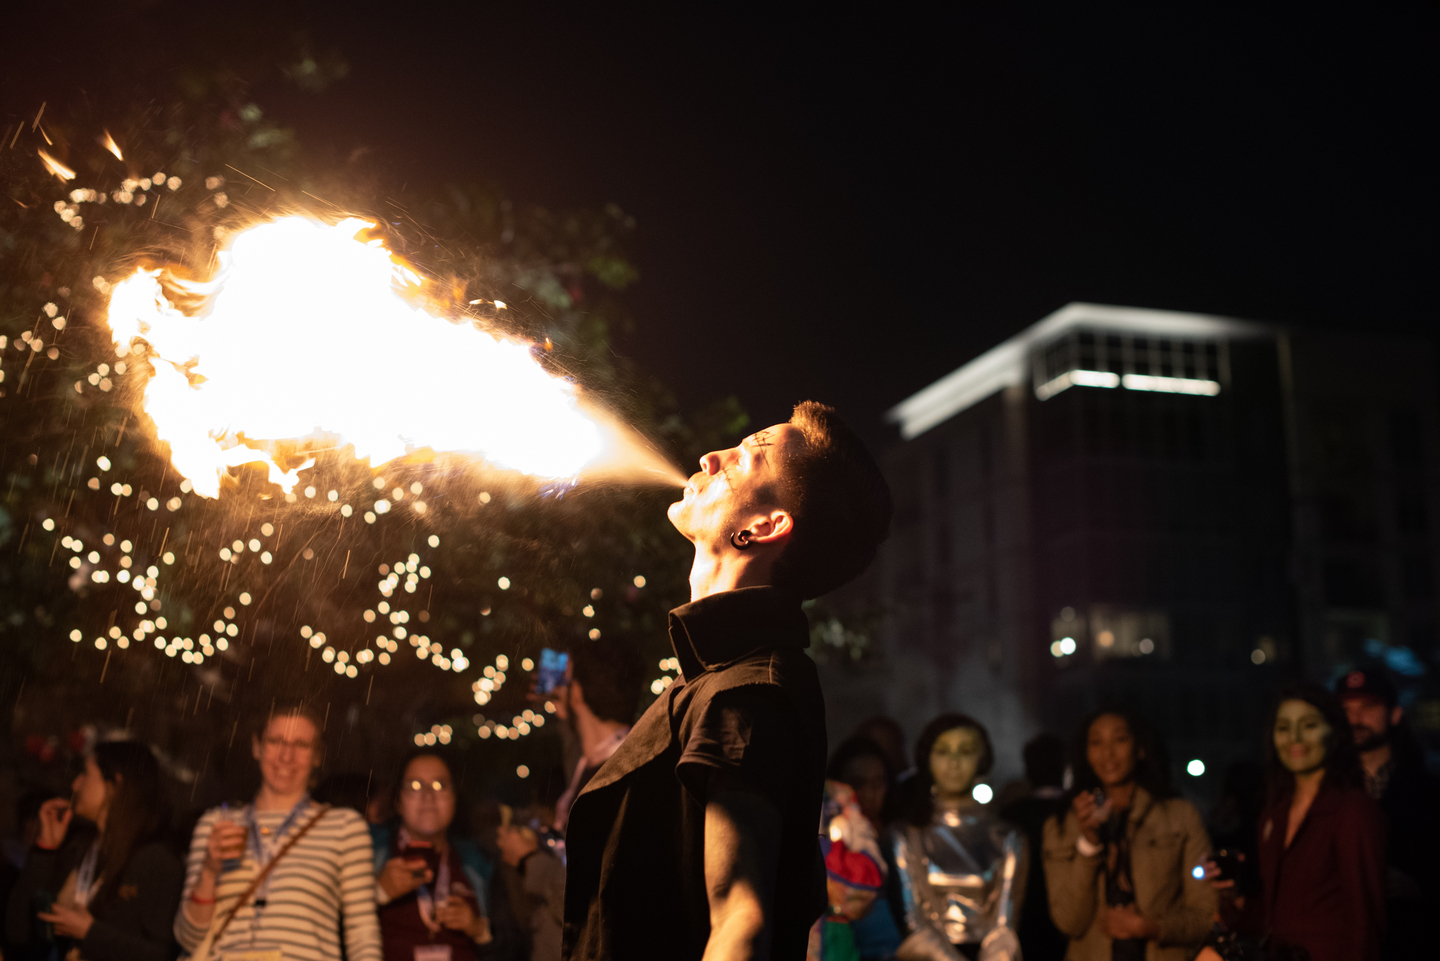 The Good Omens Pop Up hosted a festive fire breather.